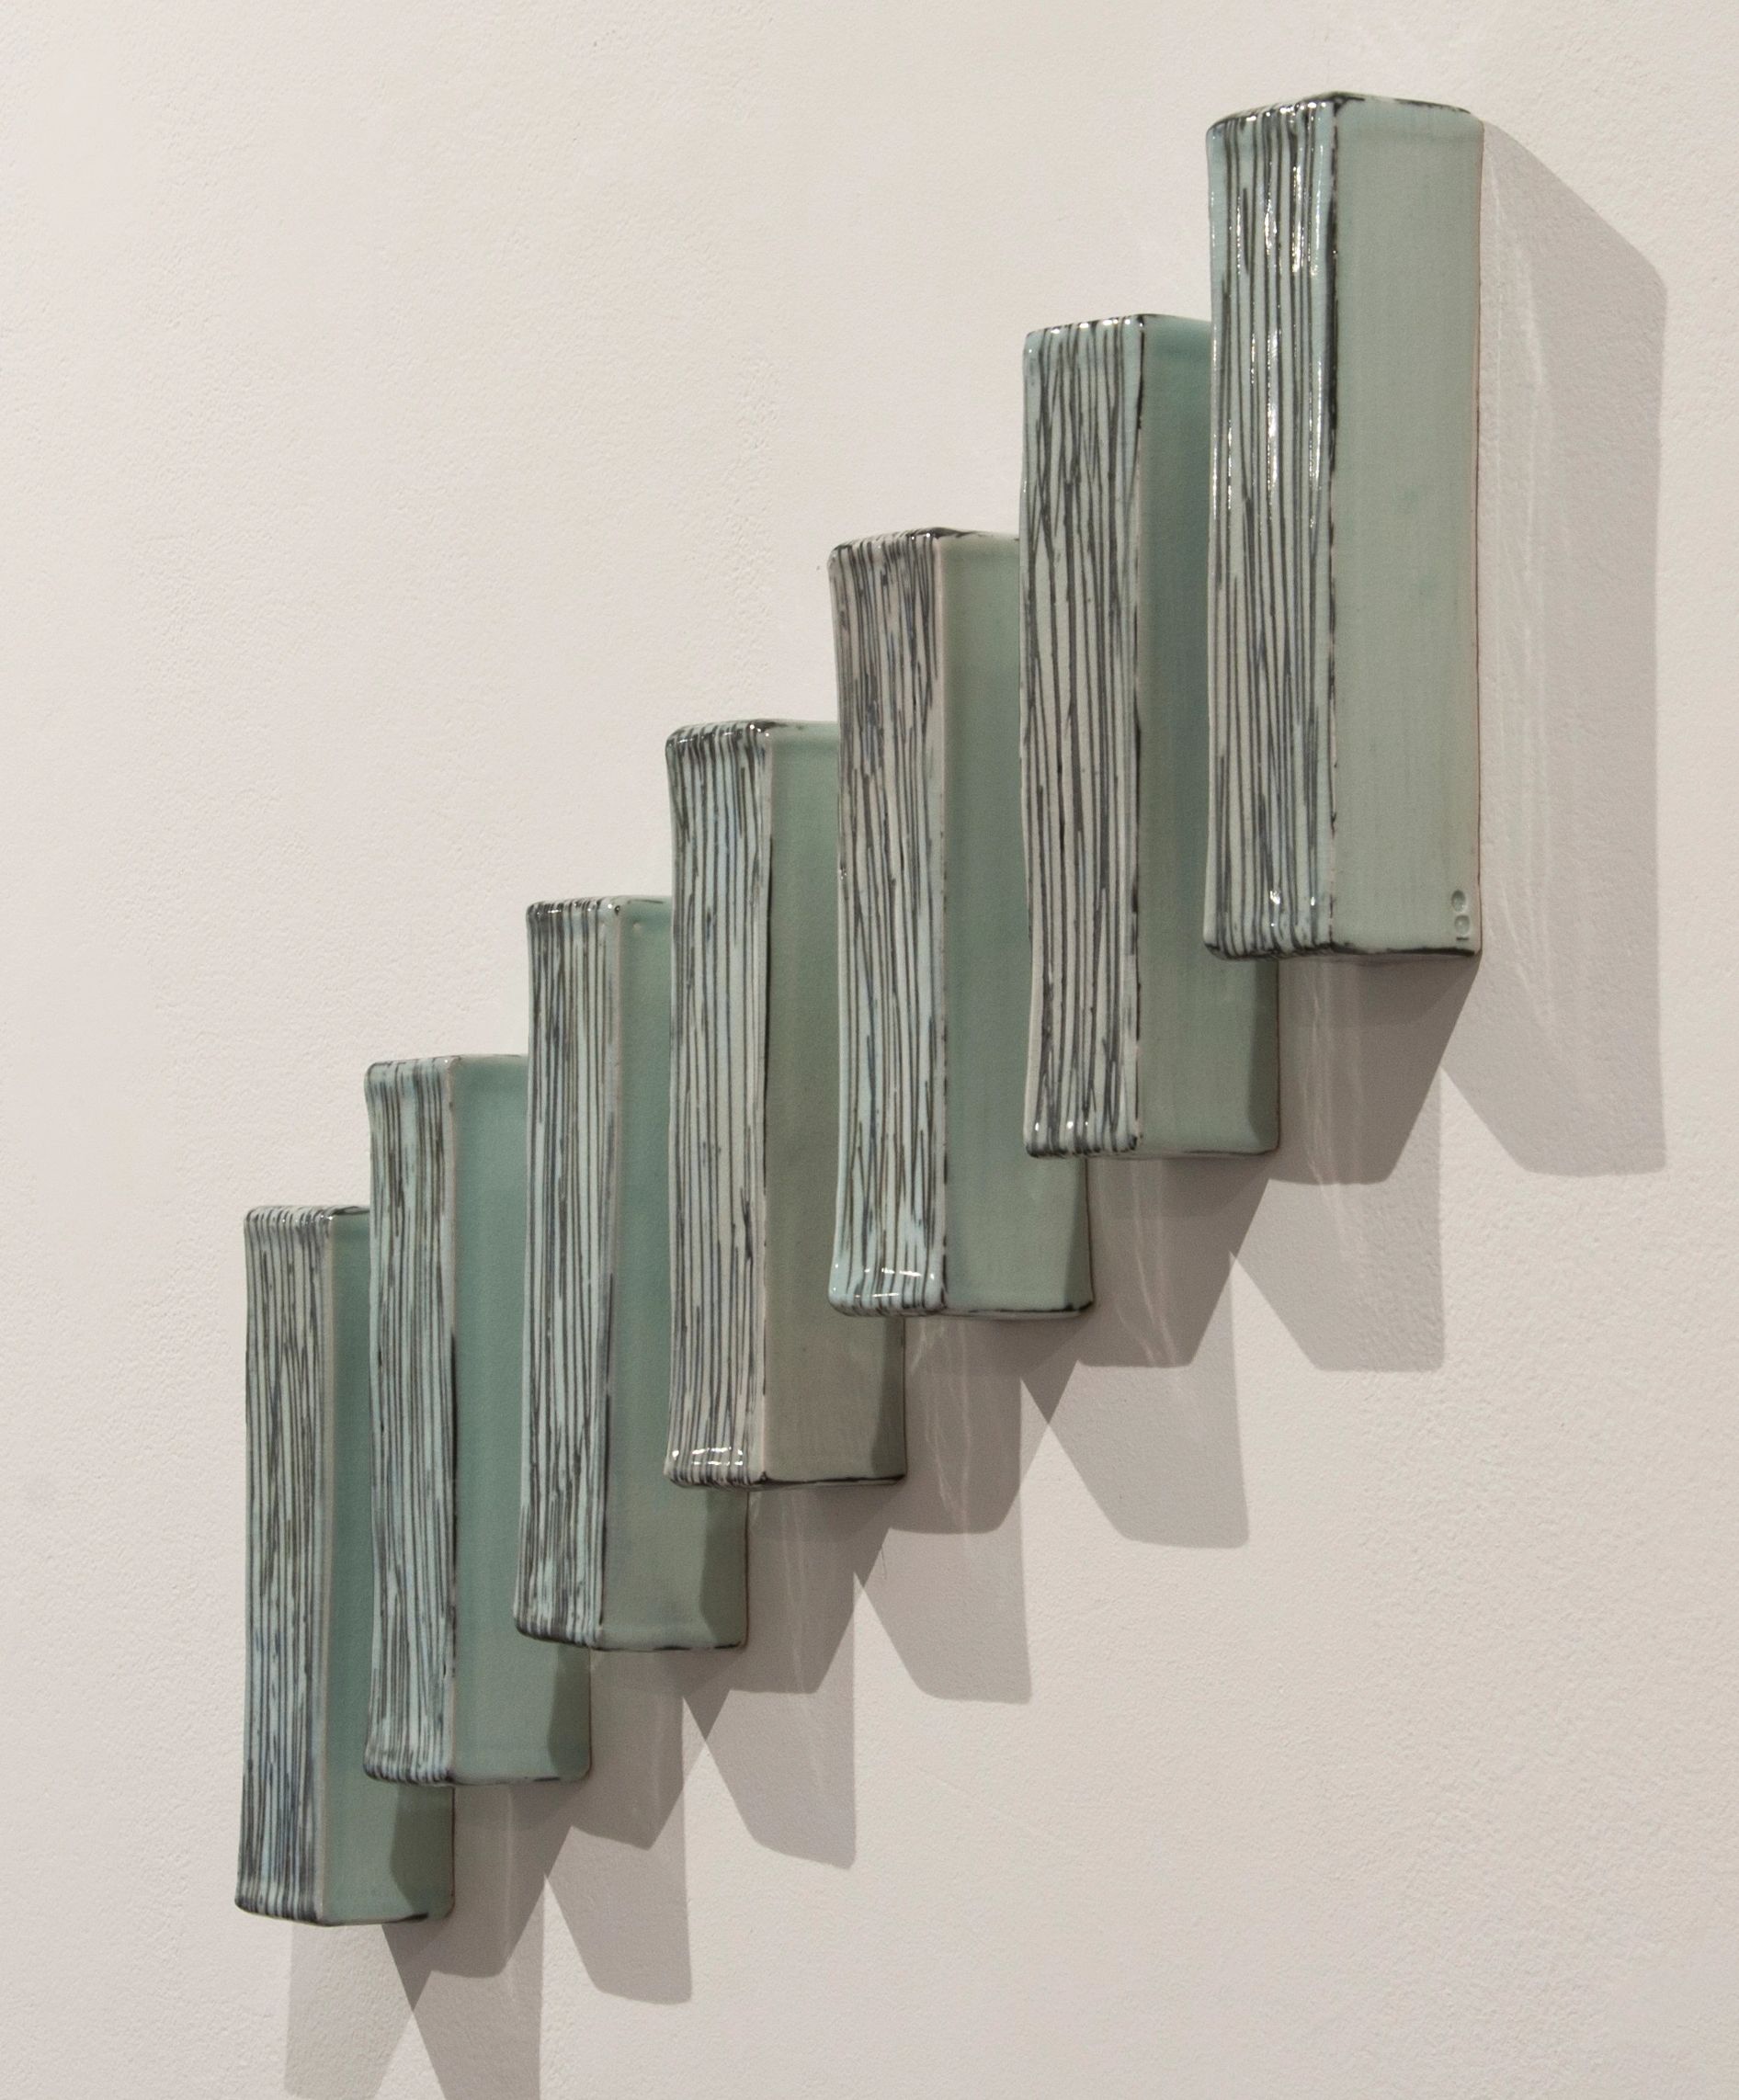 Seven porcelain rectangular forms installed on the wall using the shadows as part of the composition